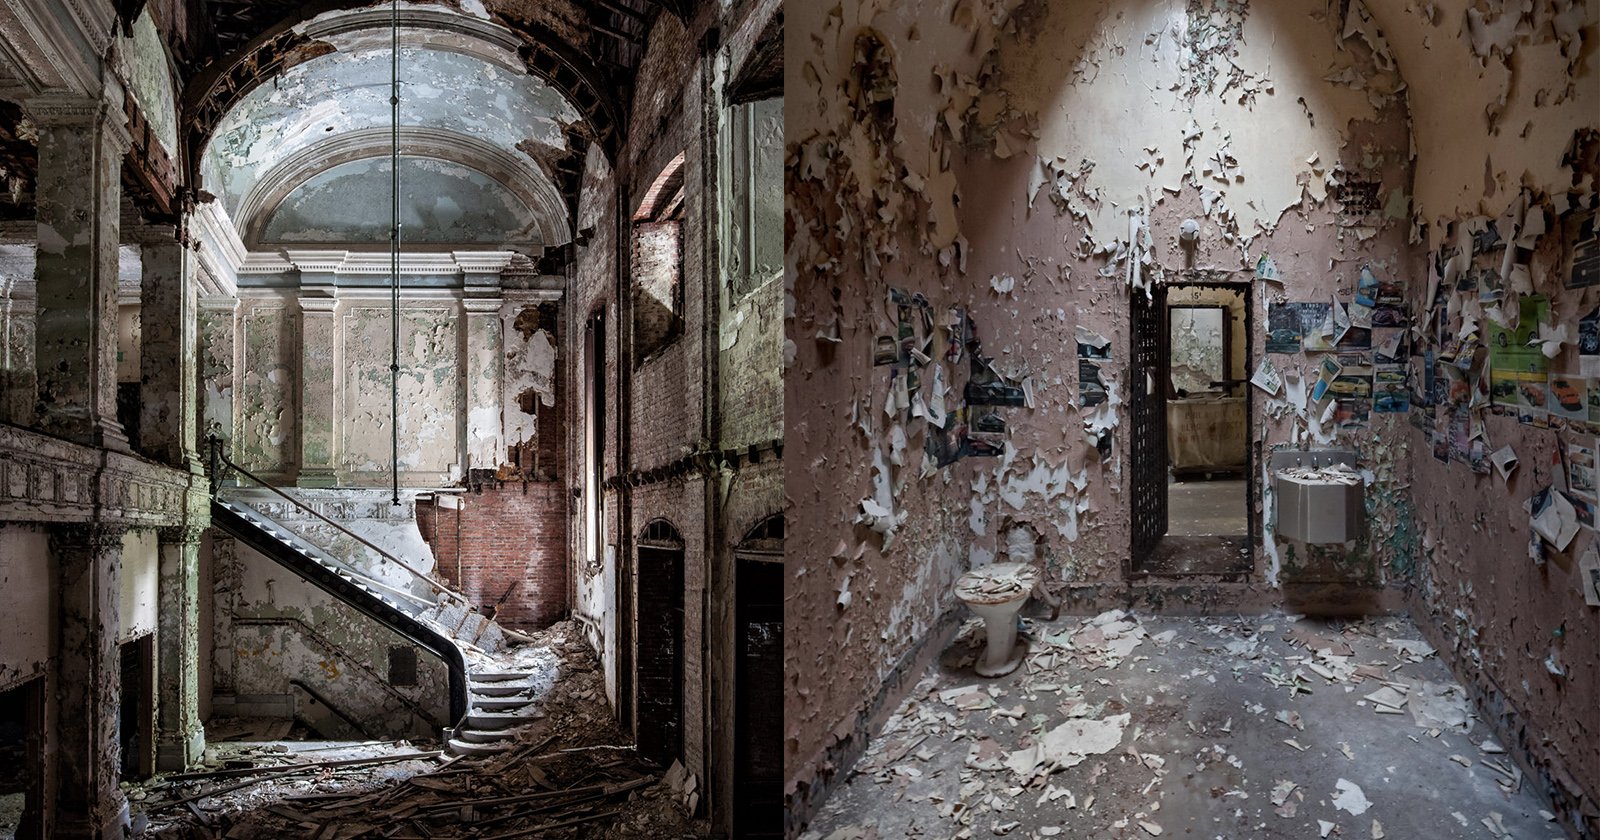  ‘Abandoned America’ Photo Series Captures History of Forgotten Places 